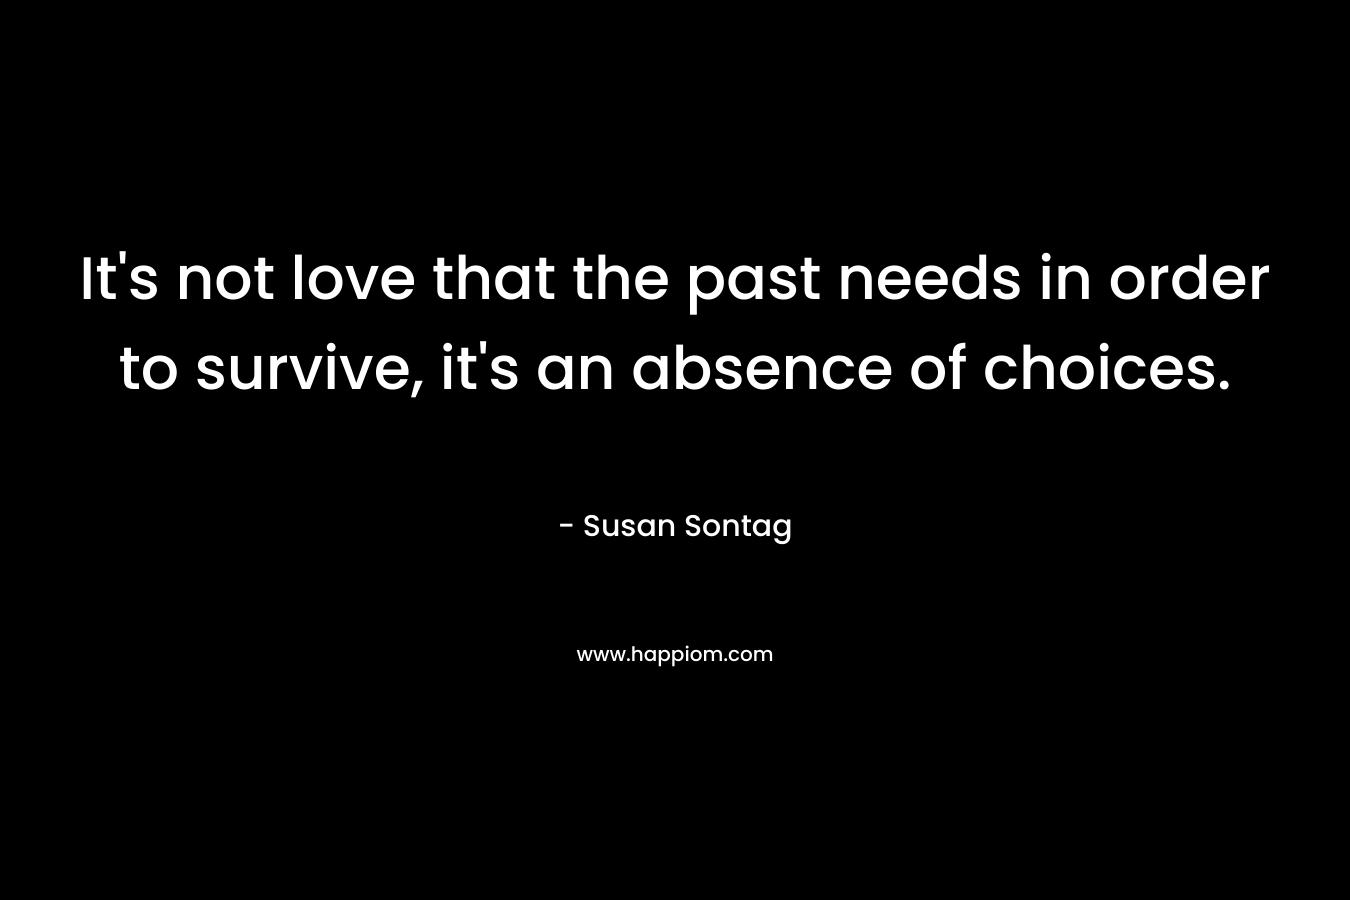 It's not love that the past needs in order to survive, it's an absence of choices.